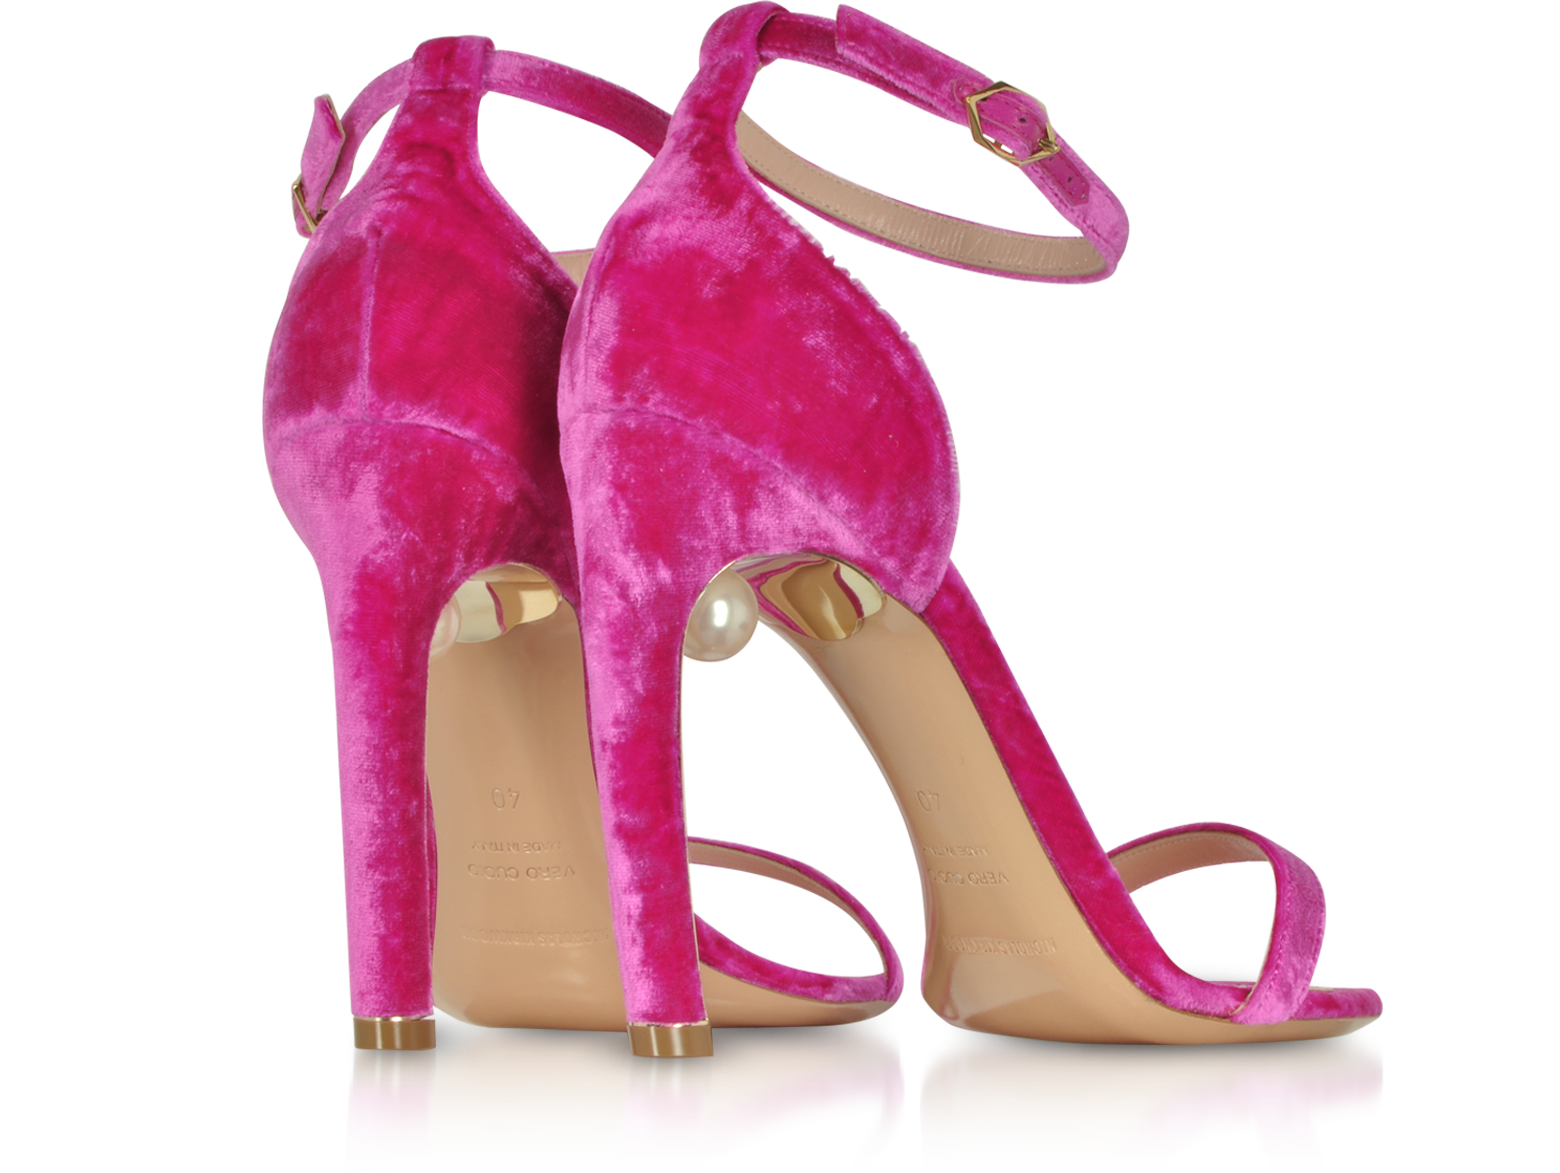 This neon satin pink Nicholas Kirkwood sandals is a must have